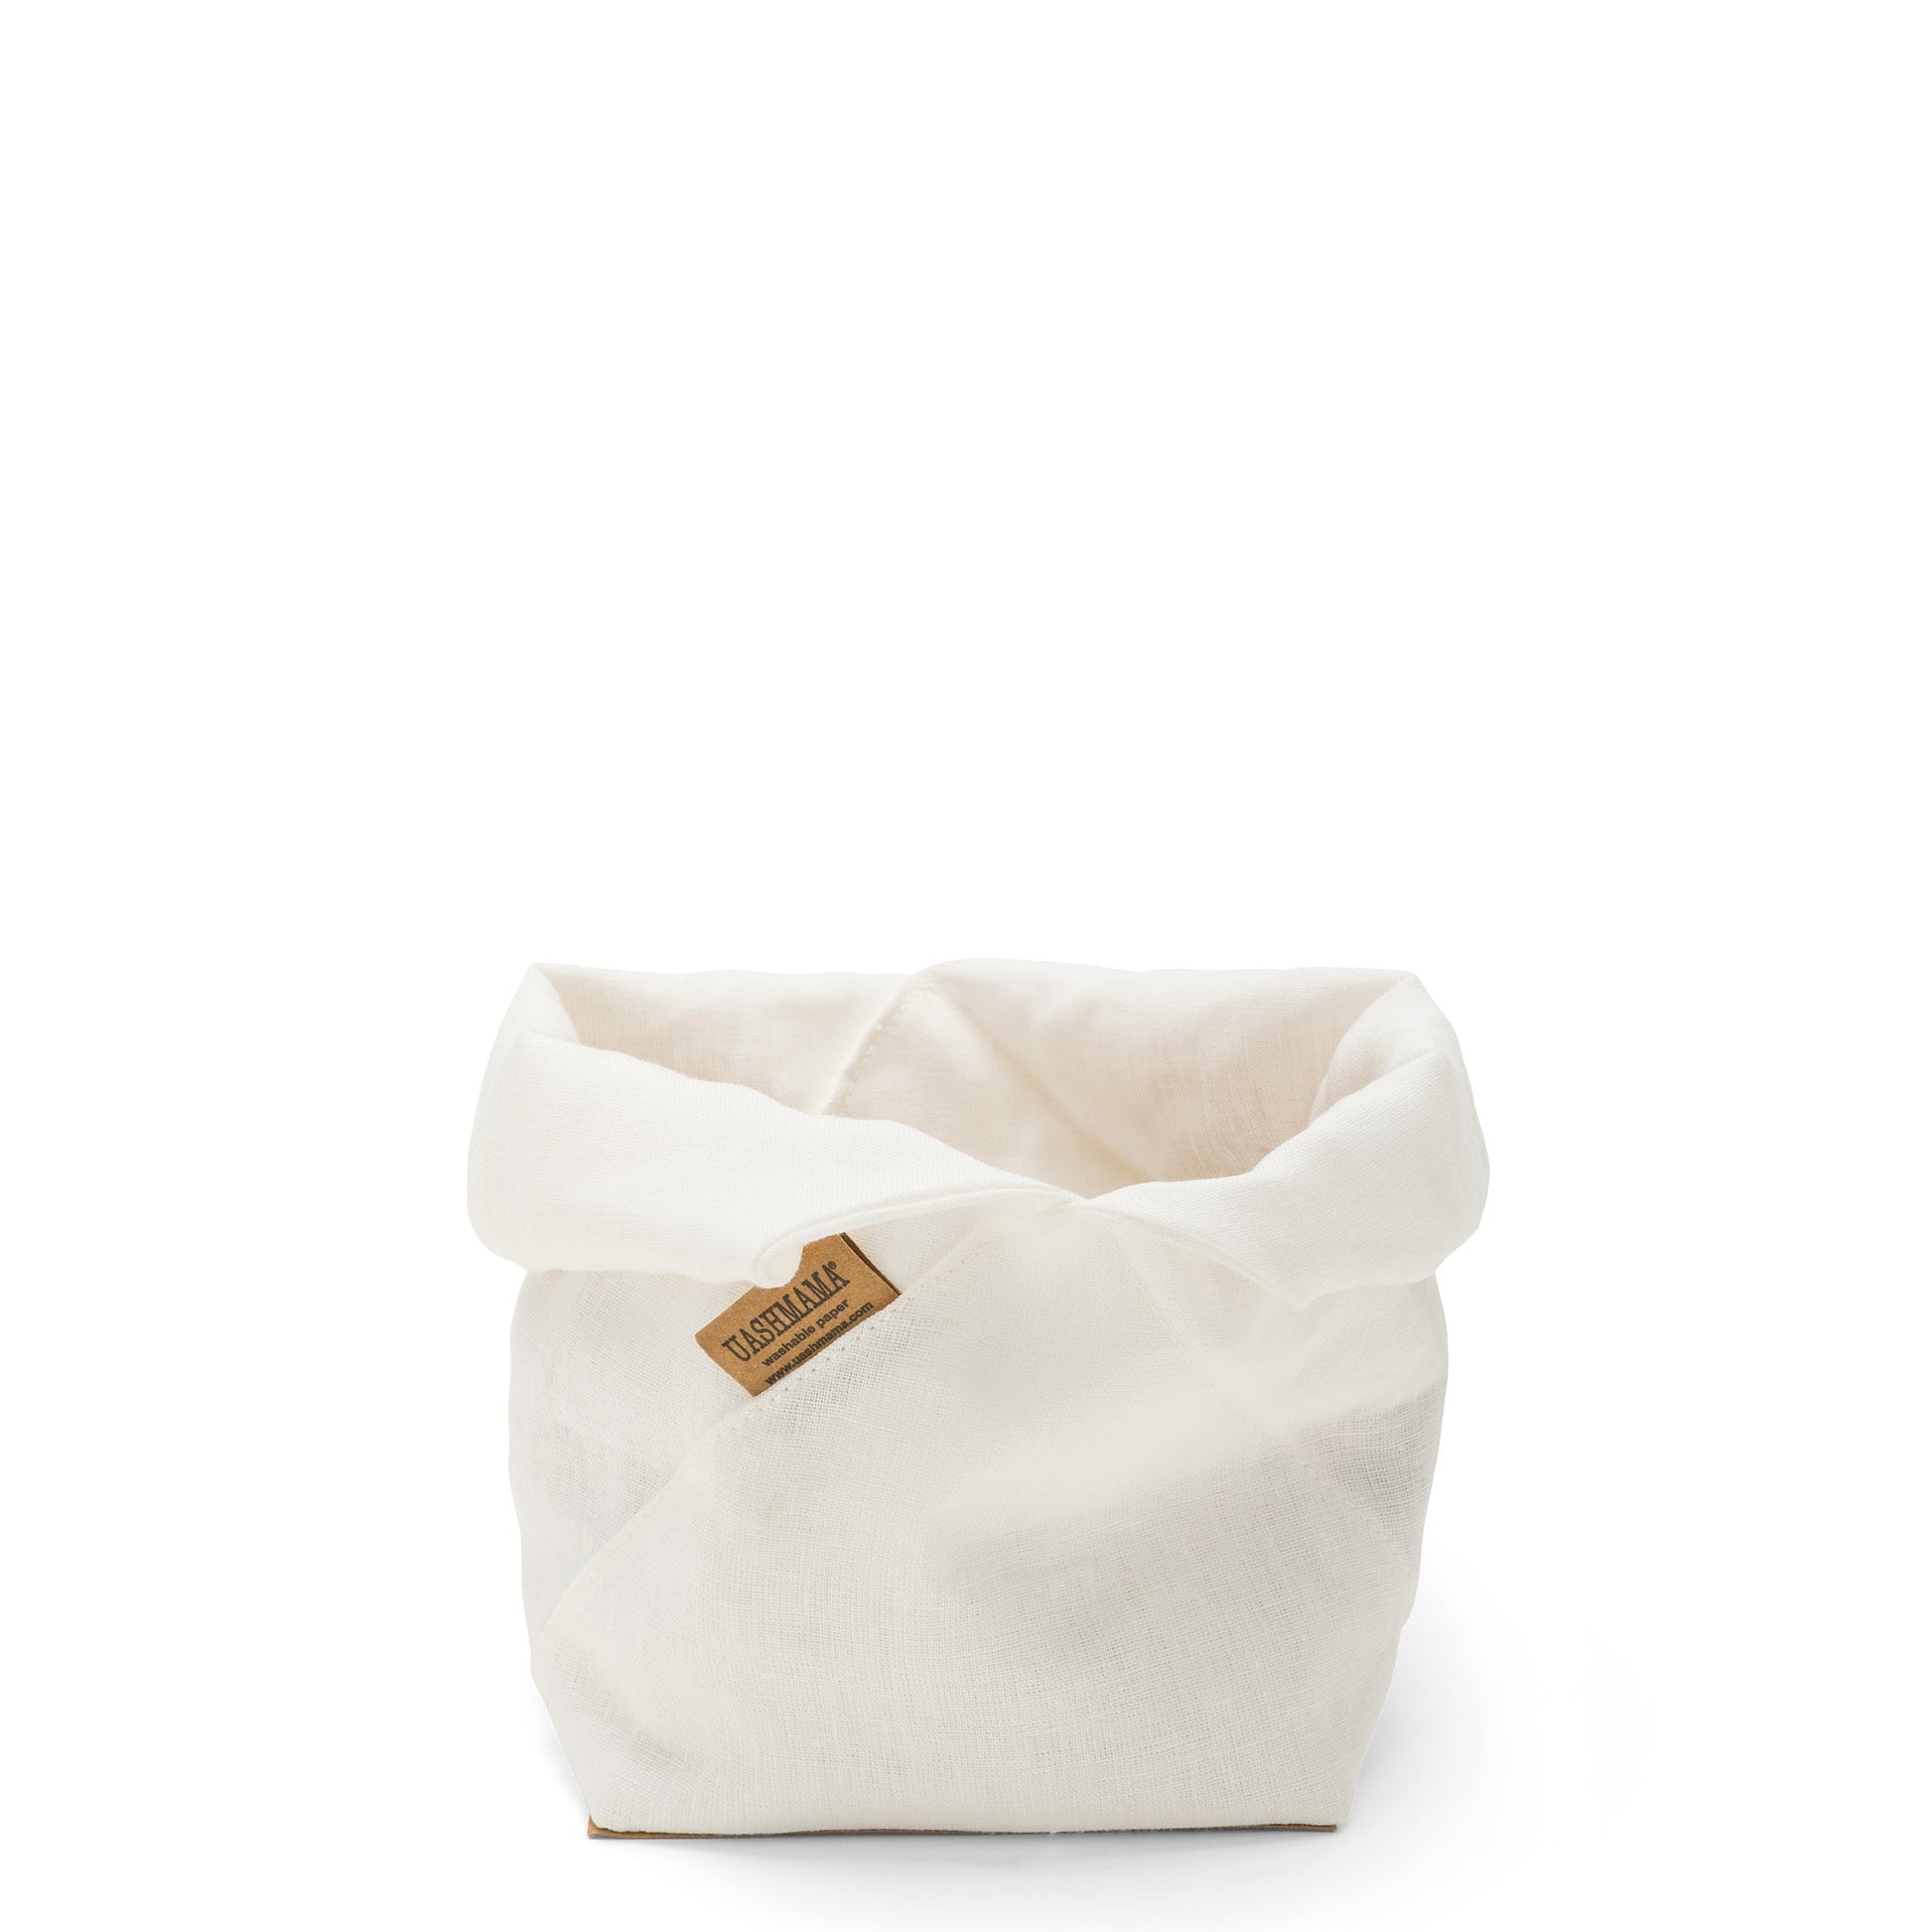 A white linen bread bag is shown with the top rolled down, open. A brown logo UASHMAMA tag features on the front side.